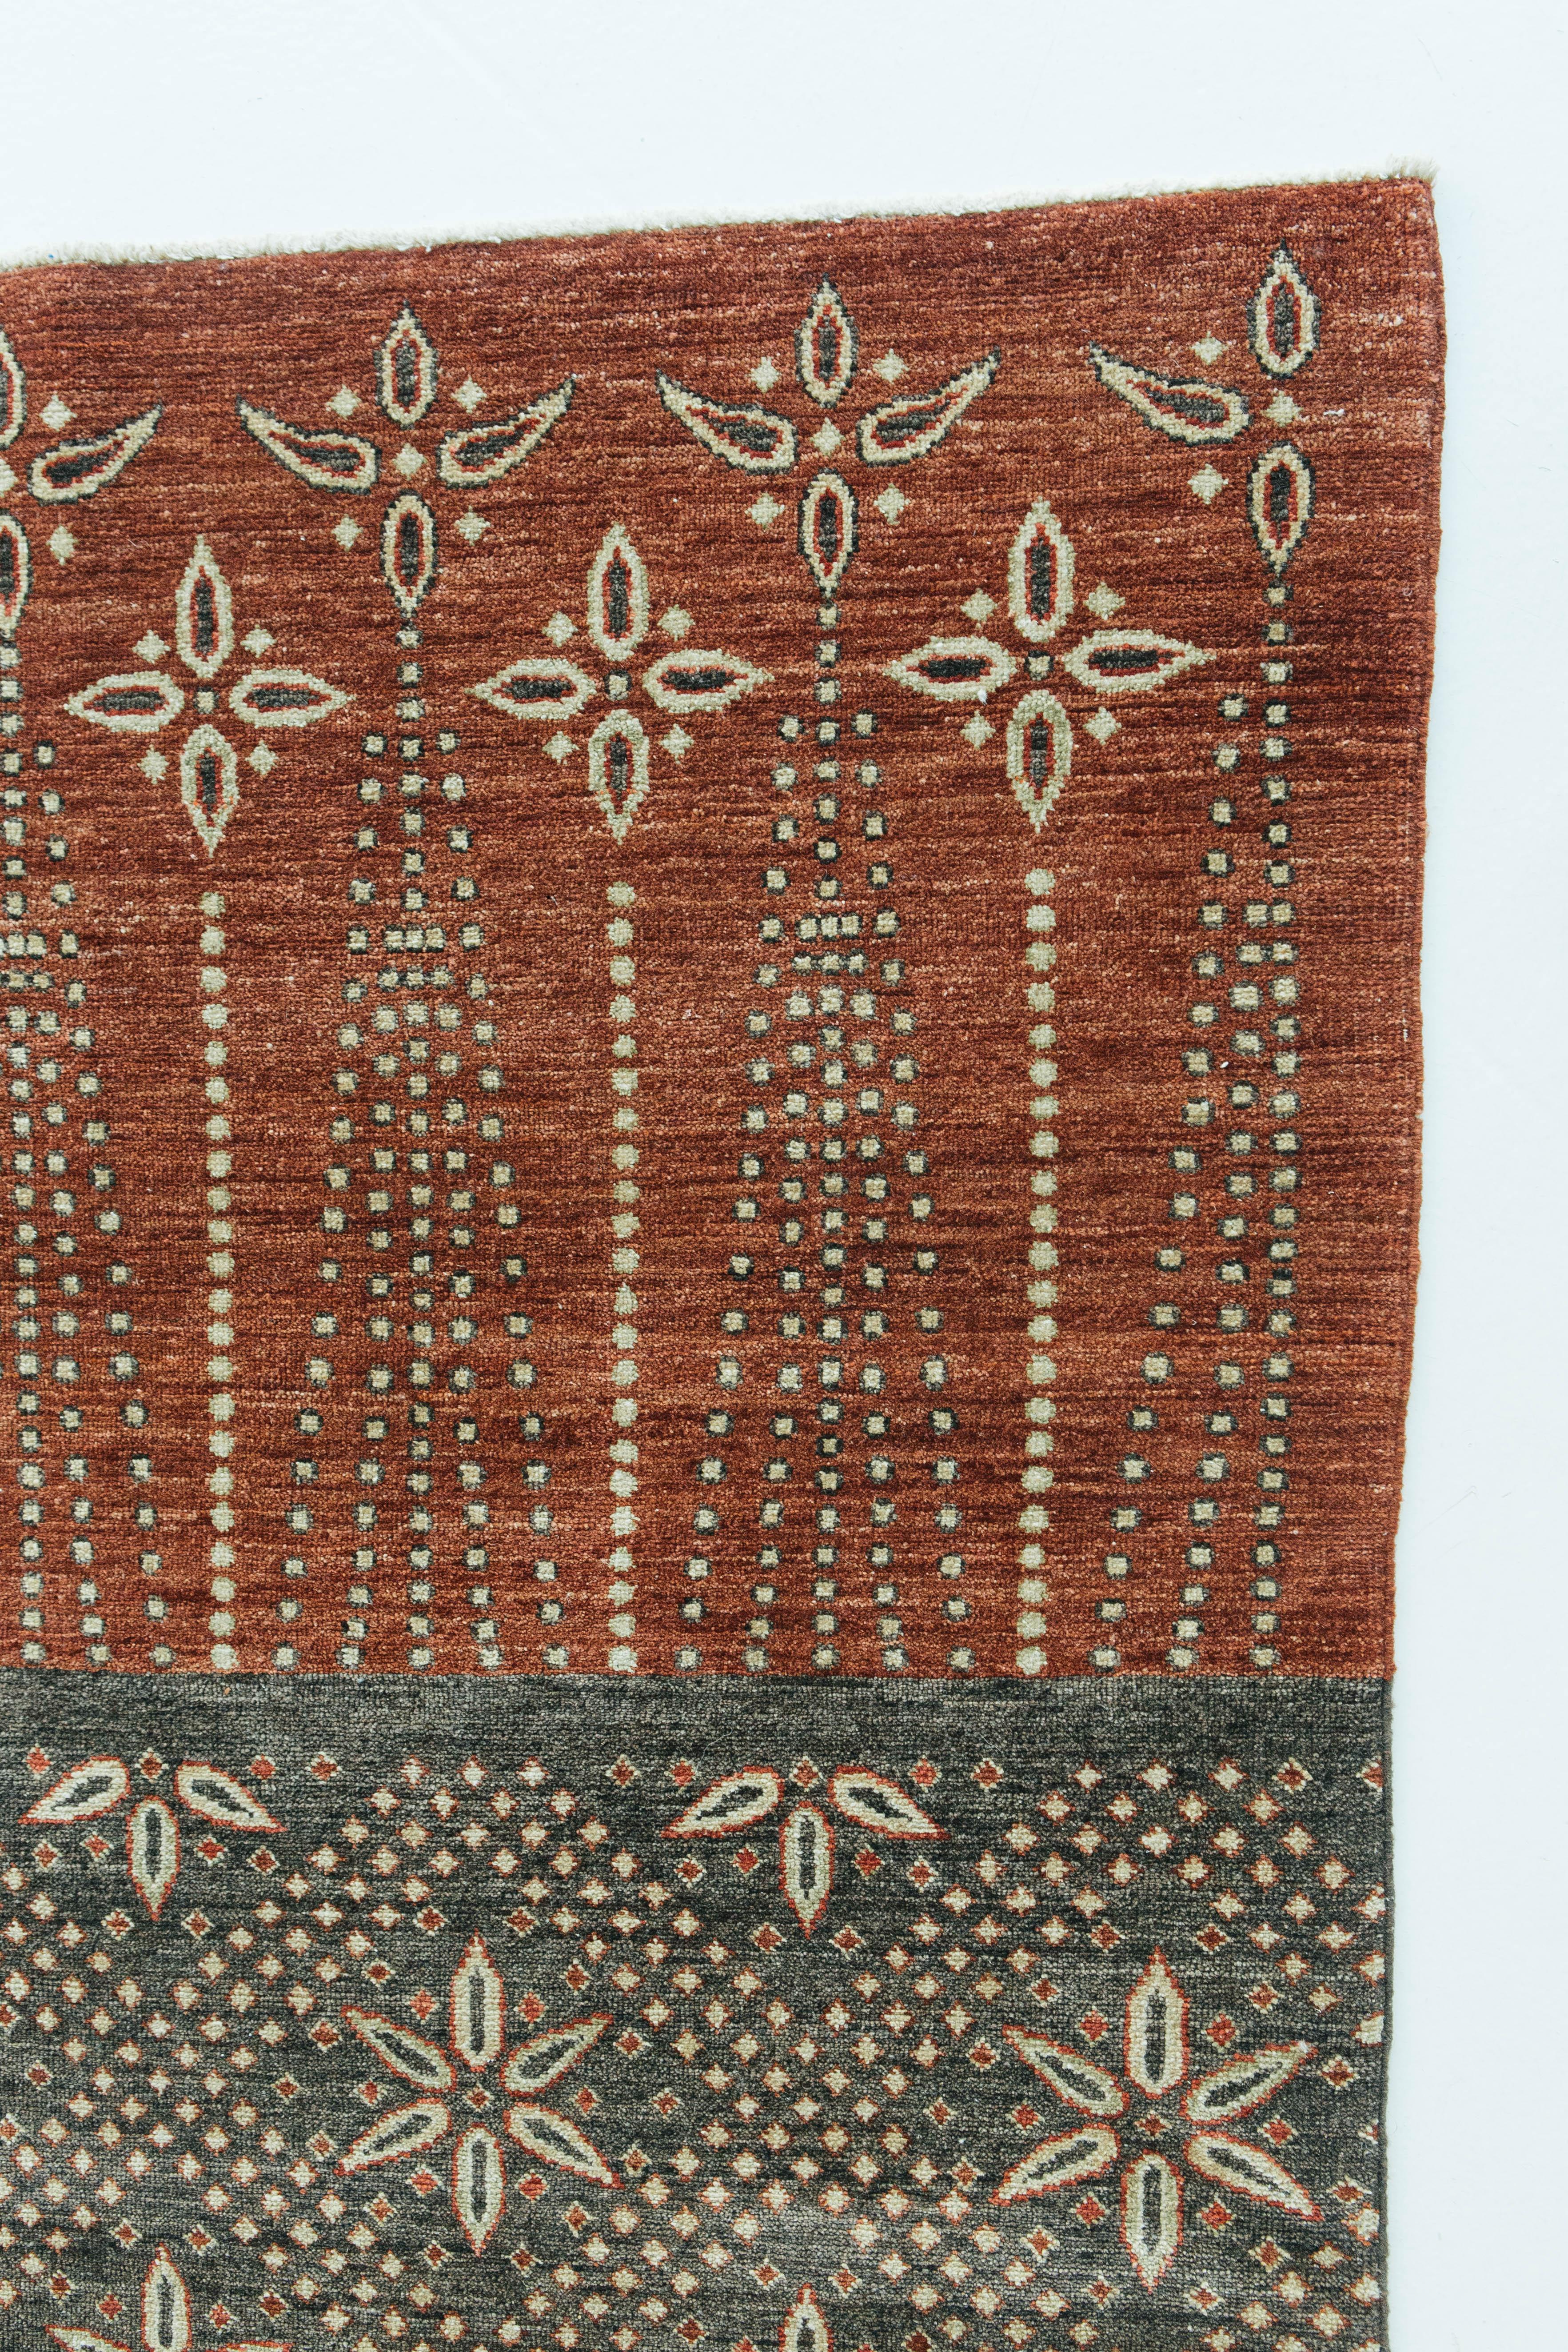 A natural dye Shawl design recreation with beautiful floral blocking and tribal patterns. The red, brown, and golden ivory colors work cohesively to make this Indian Shawl textile design filled with warmth and spontaneity.


Rug number